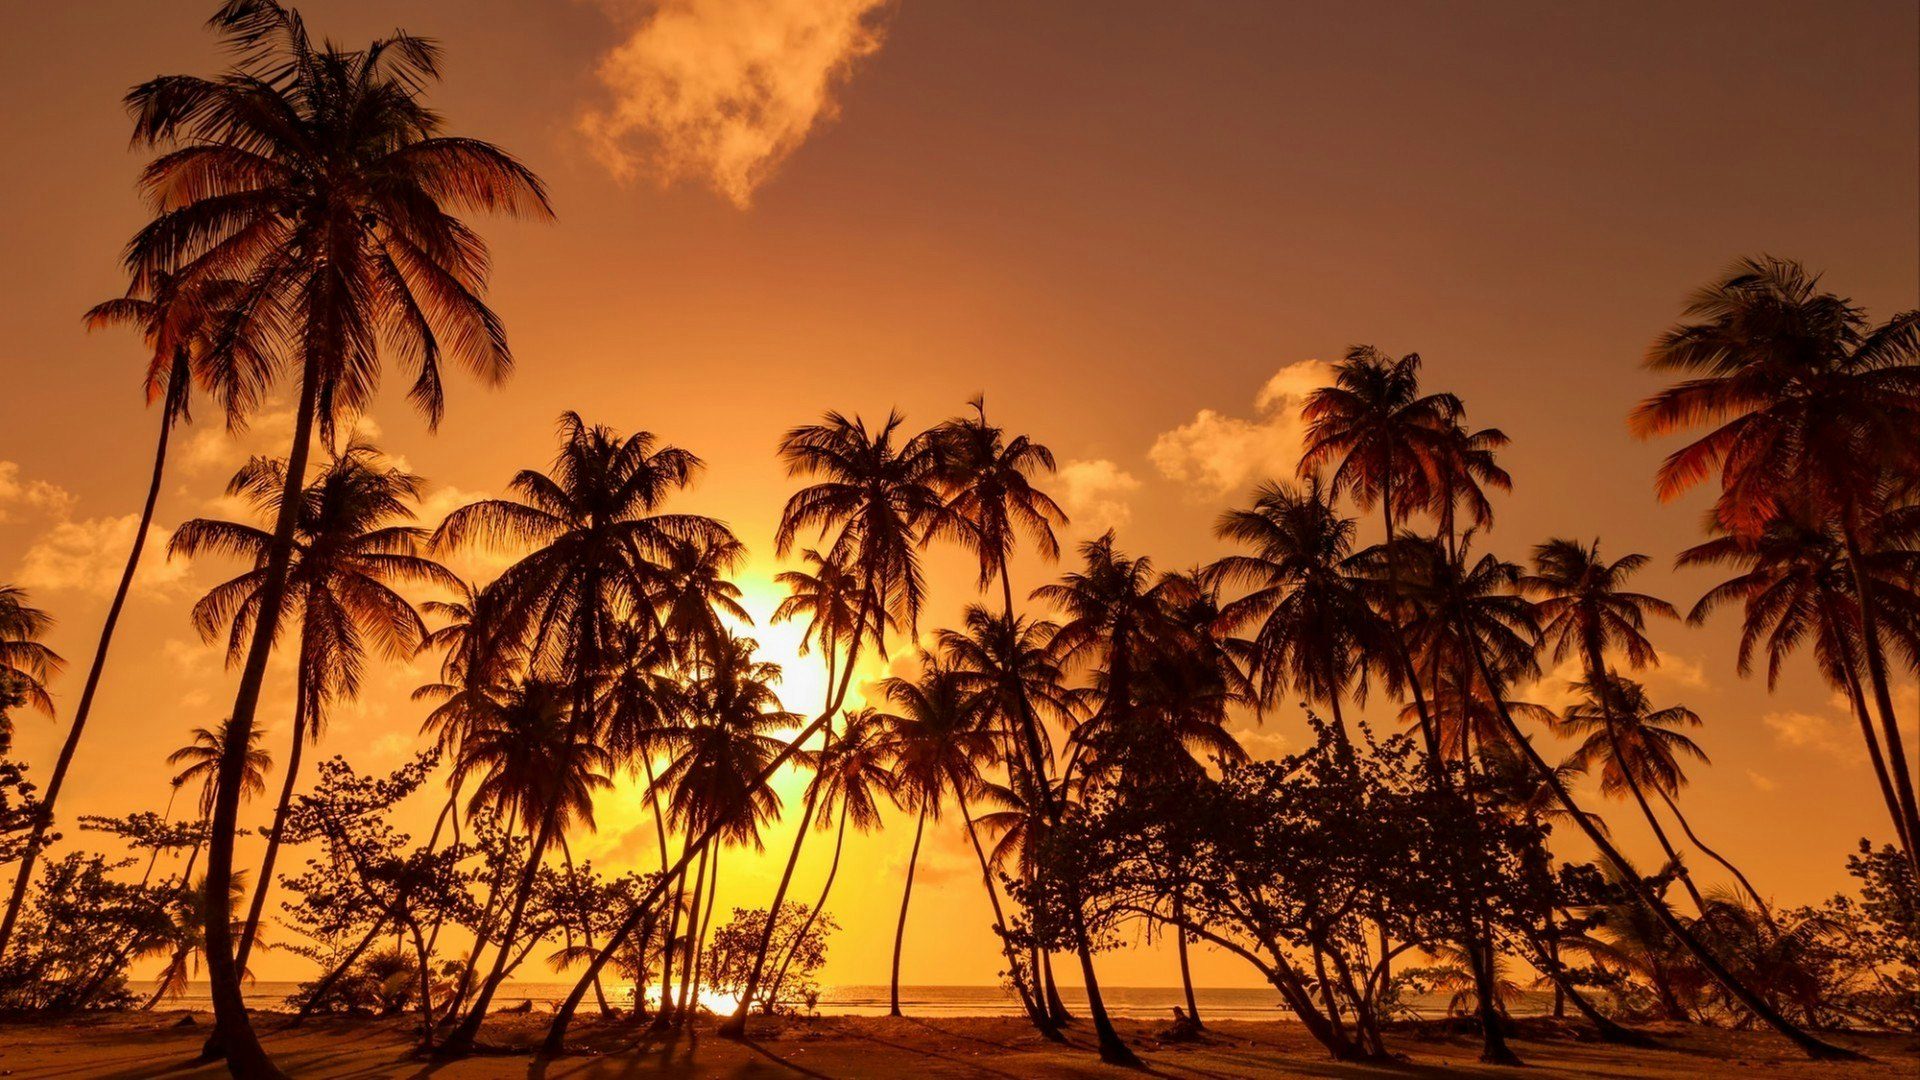 Panorama in Trinidad and Tobago, silhouette of coconut palm trees on colorful sun set